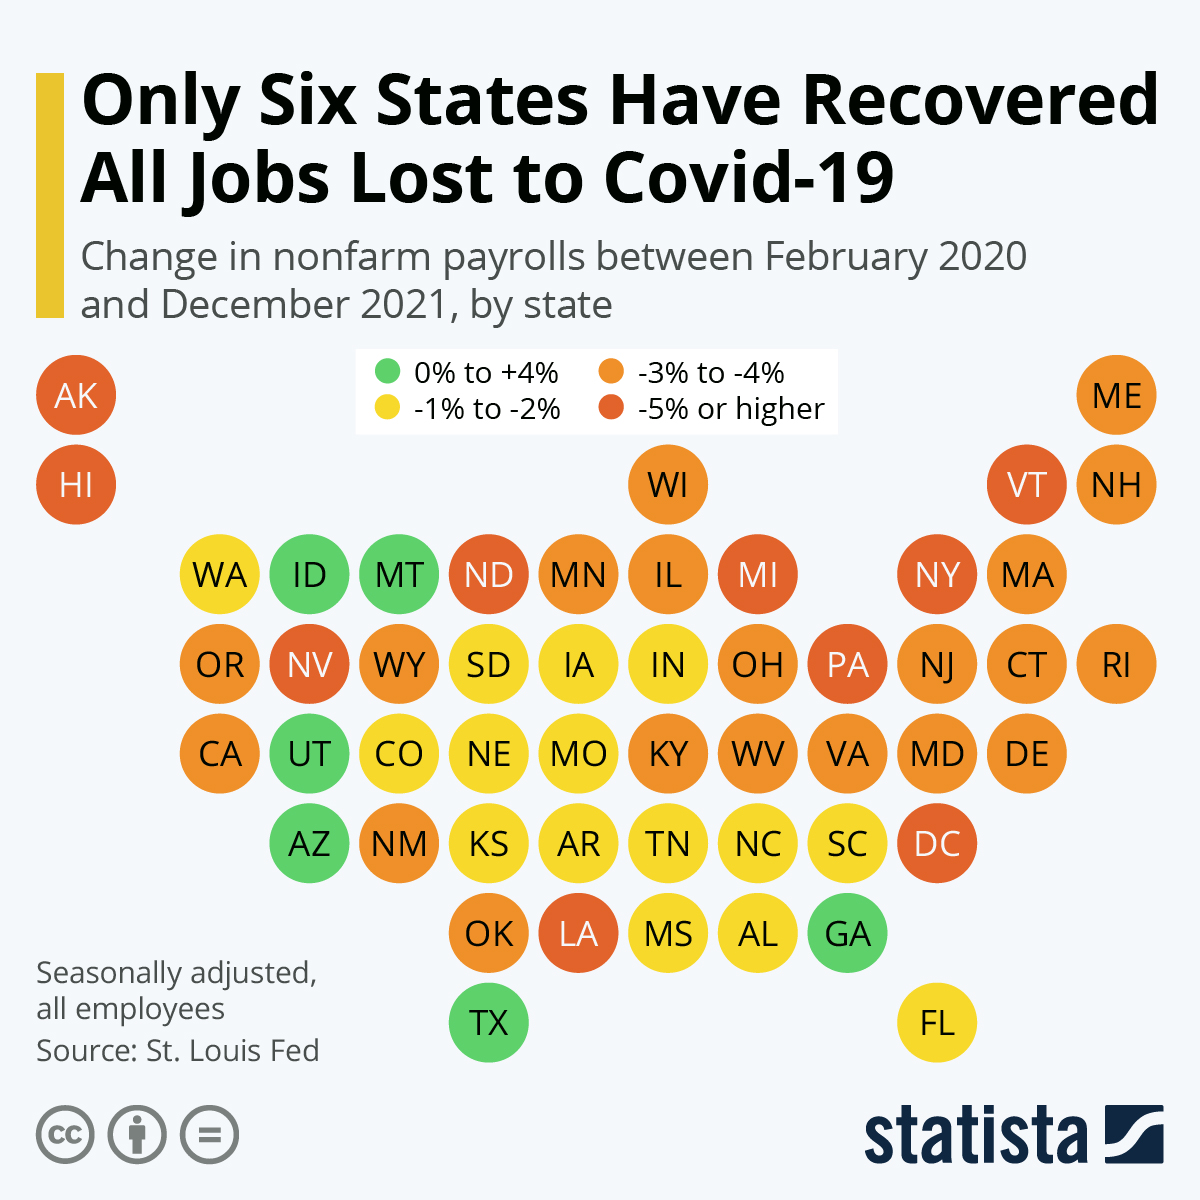 Only Six States Have Recovered All Jobs Lost to COVID-19